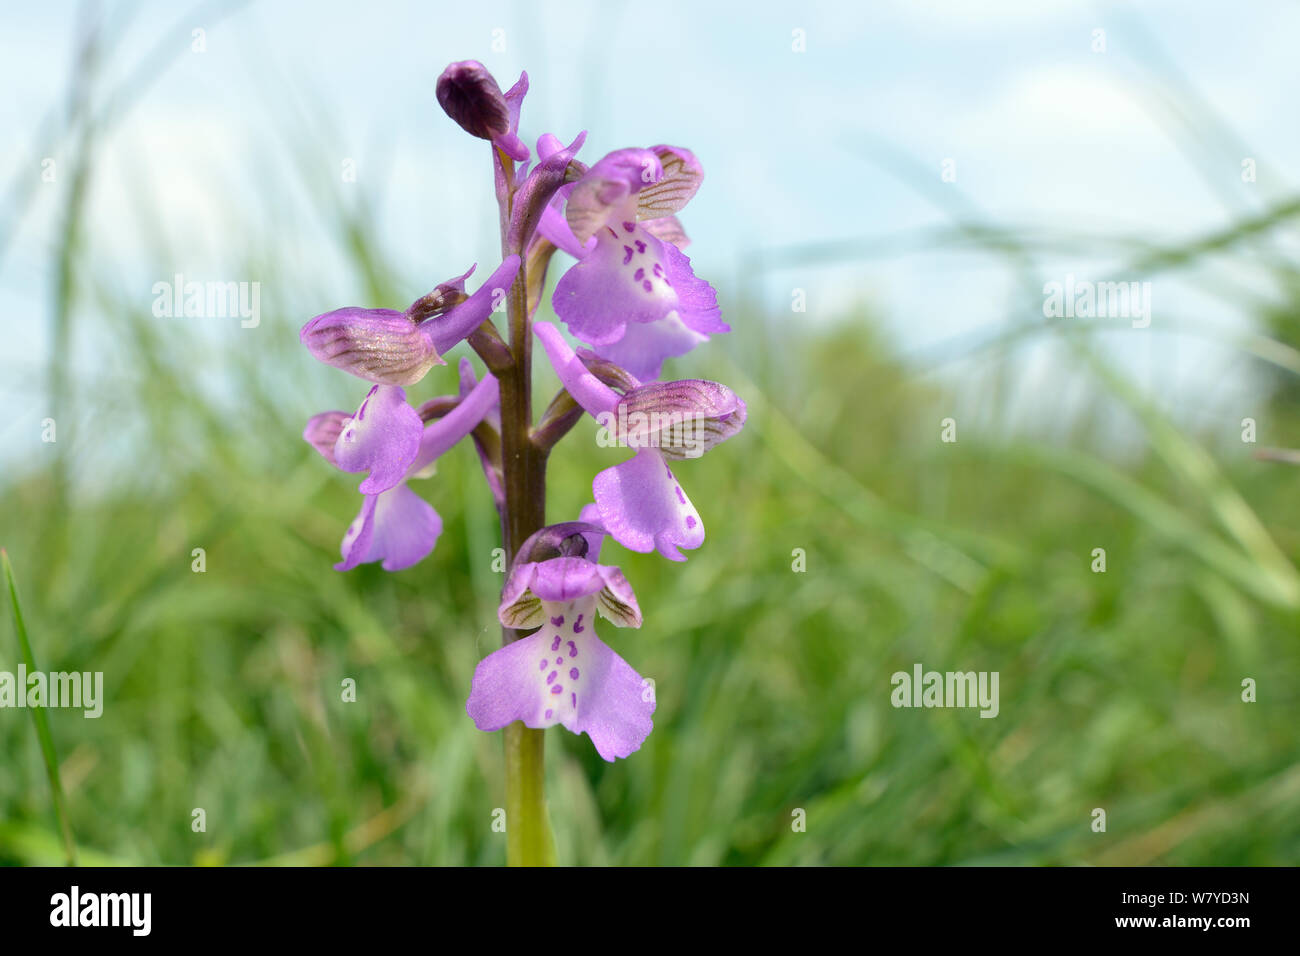 Green-winged orchid (Orchis / Anacamptis morio) flowering in a traditional hay meadow meadow, Wiltshire UK, May. Stock Photo